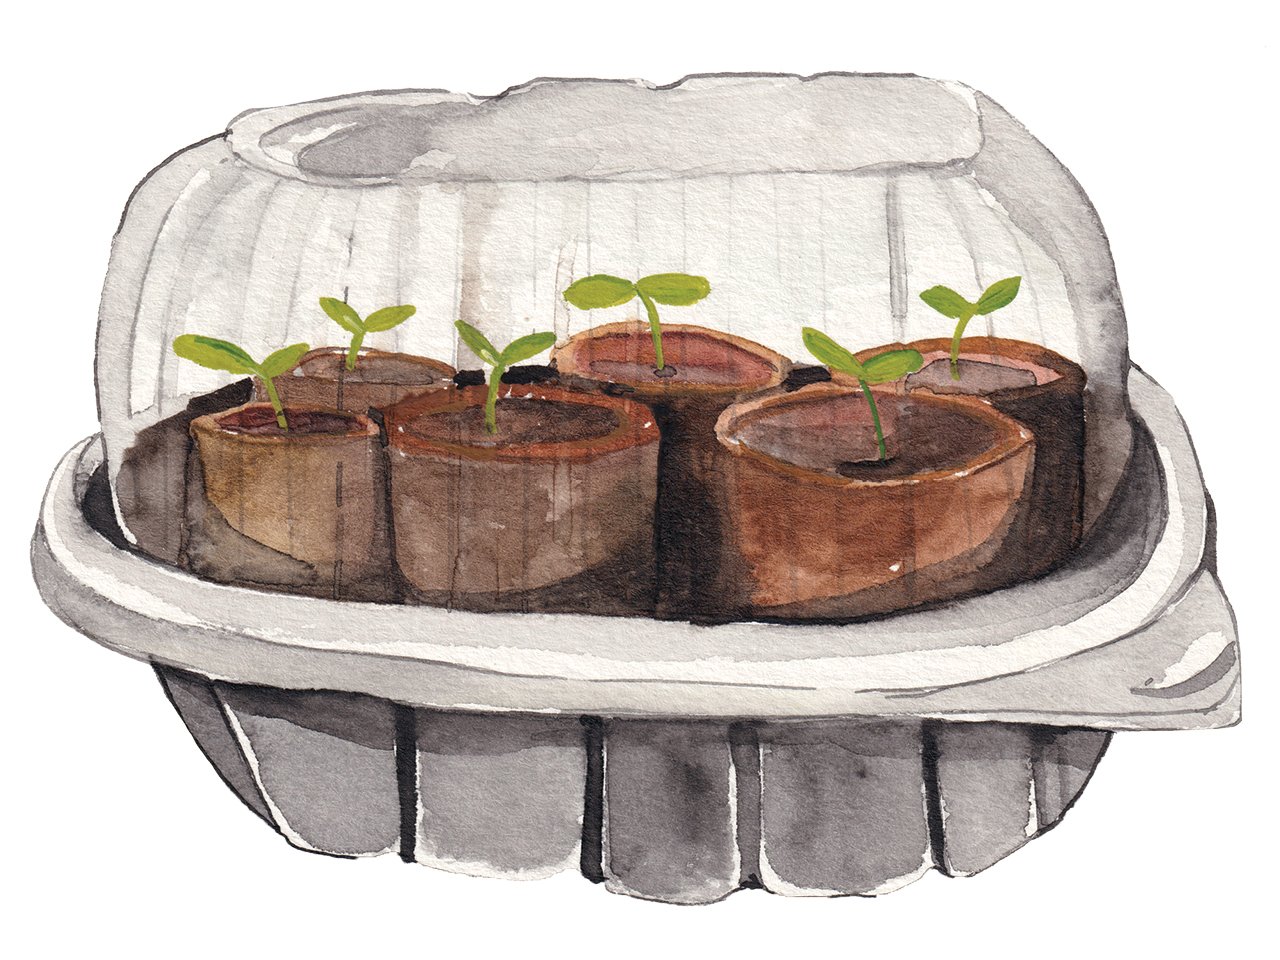 An illustration of a rotisserie chicken container with seedling pots inside against a white background.